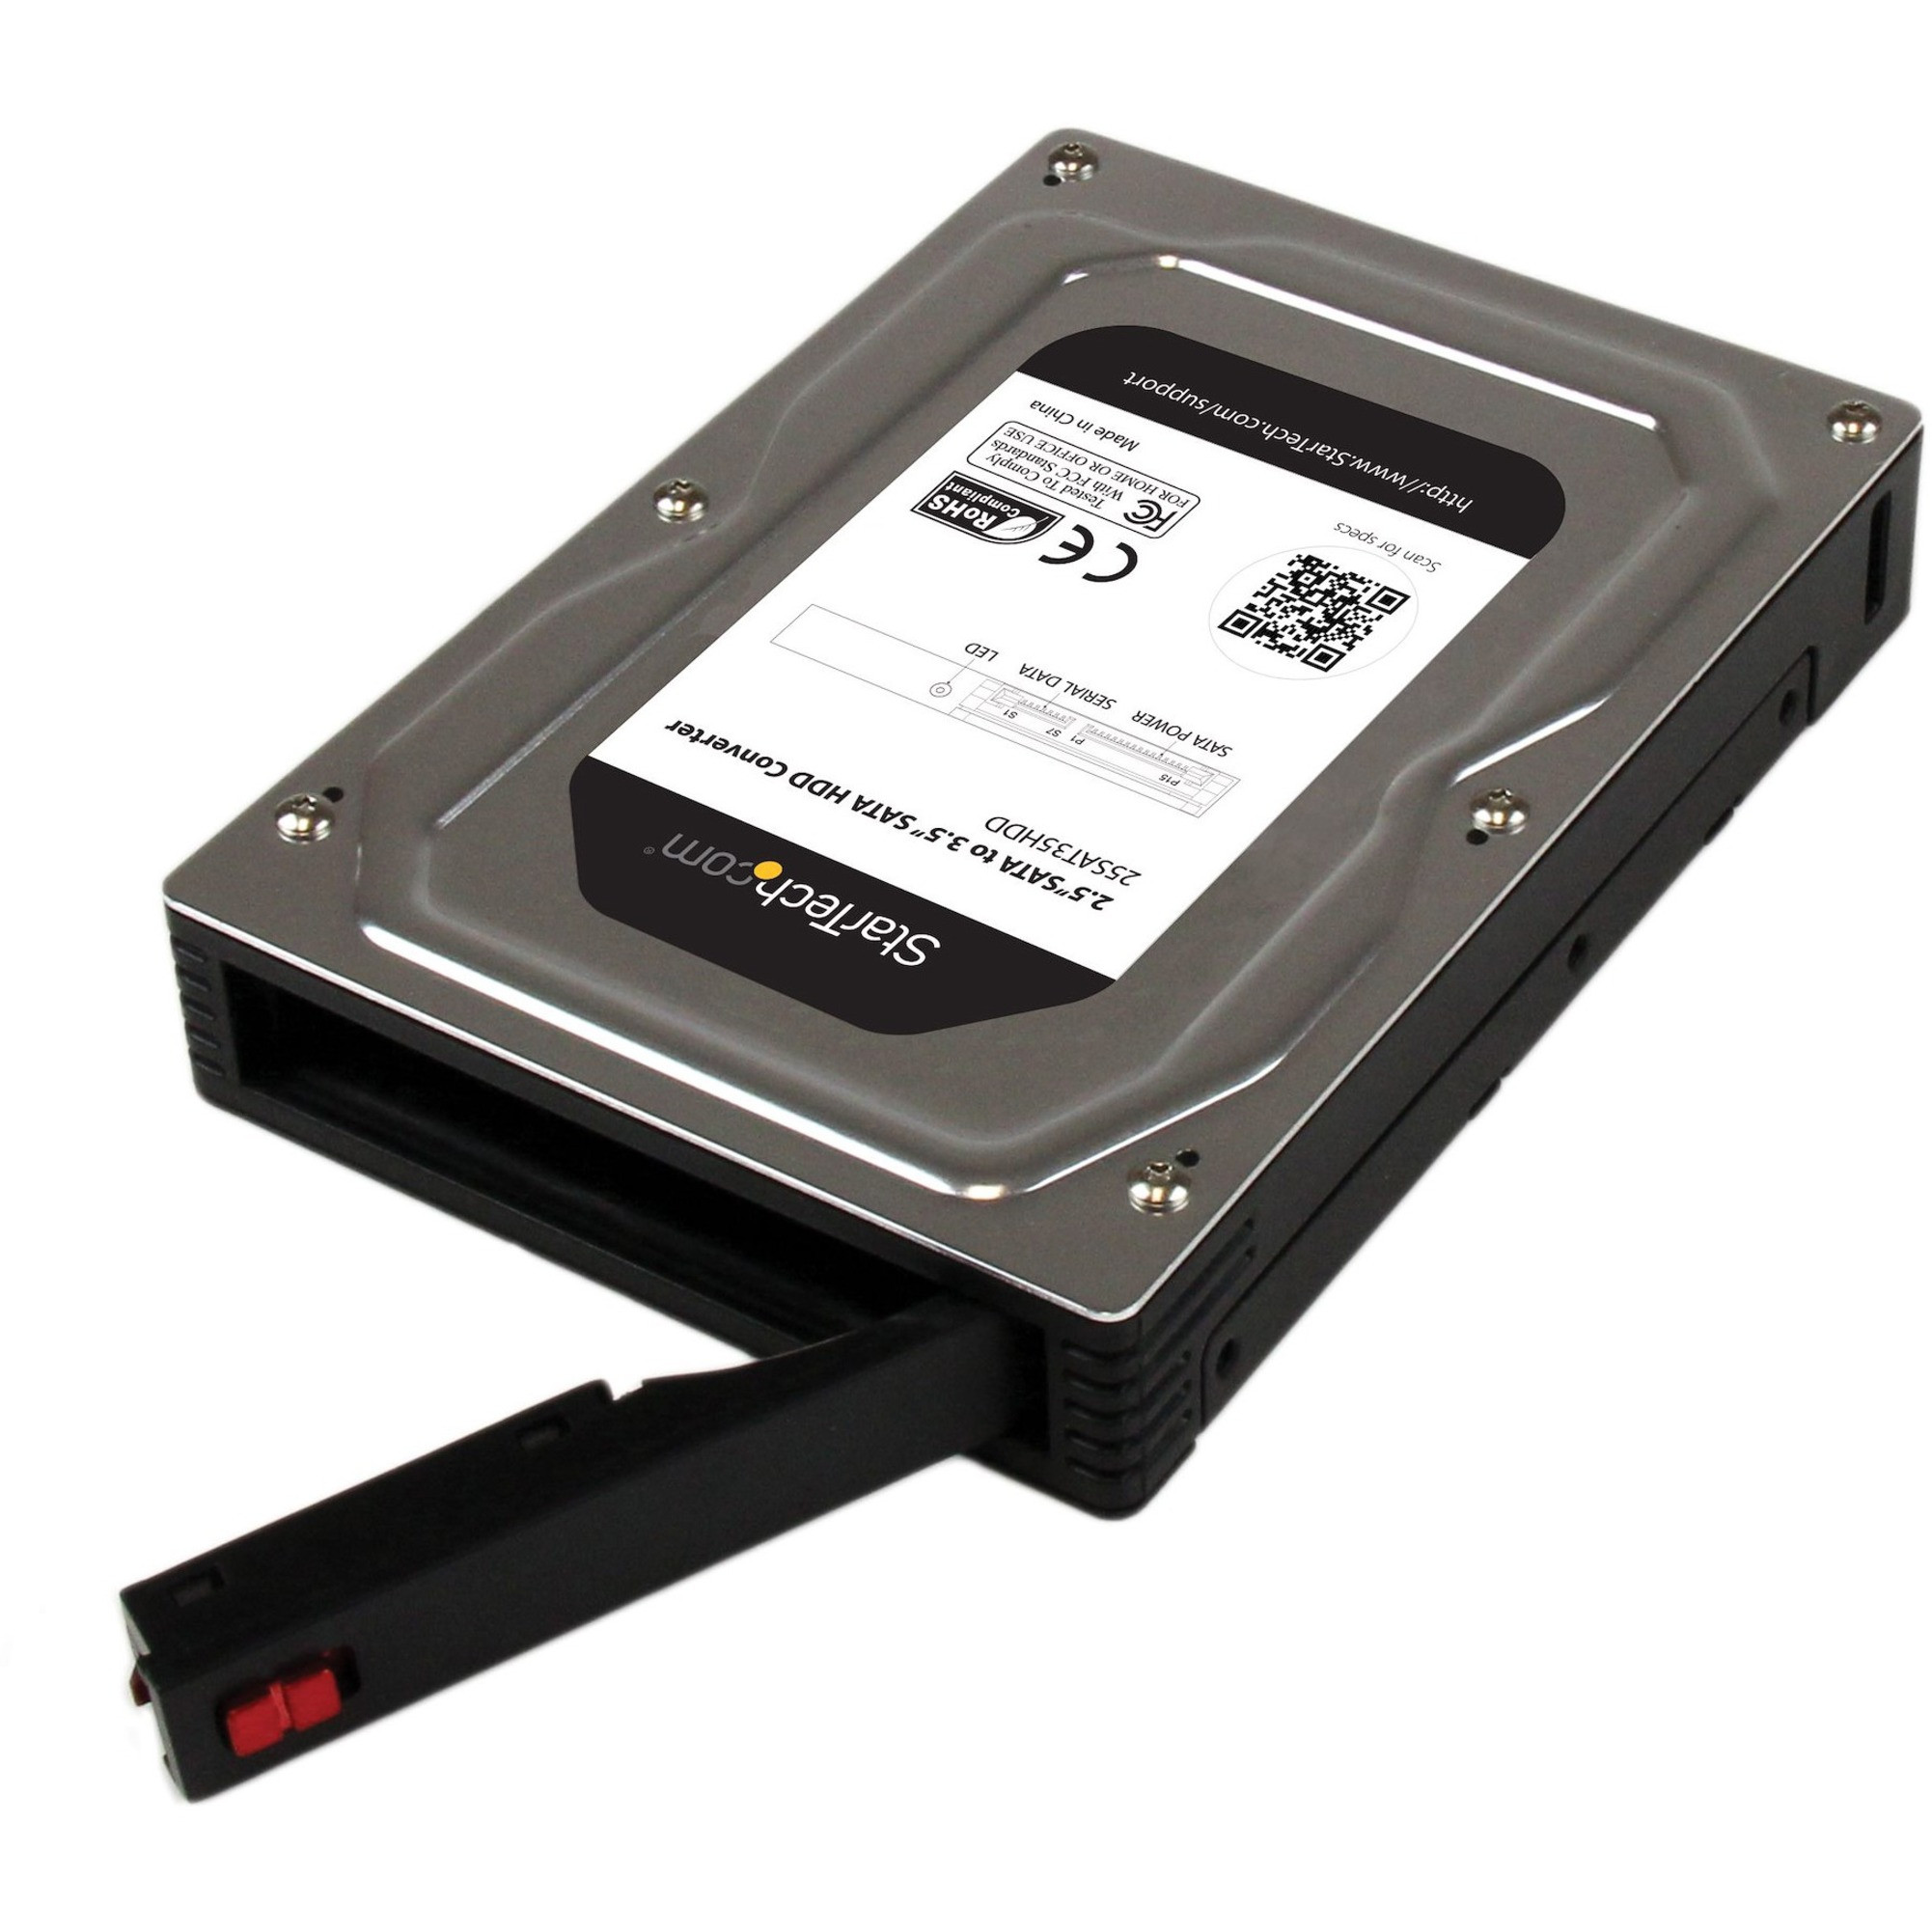 medier igen lyd Startech .com 2.5" to 3.5" SATA Aluminum Hard Drive Adapter Enclosure with  SSD / HDD Height up to 12.5mmTurn a 2.5" SATA HDD/SSD into a 3.5...  25SAT35HDD - Corporate Armor